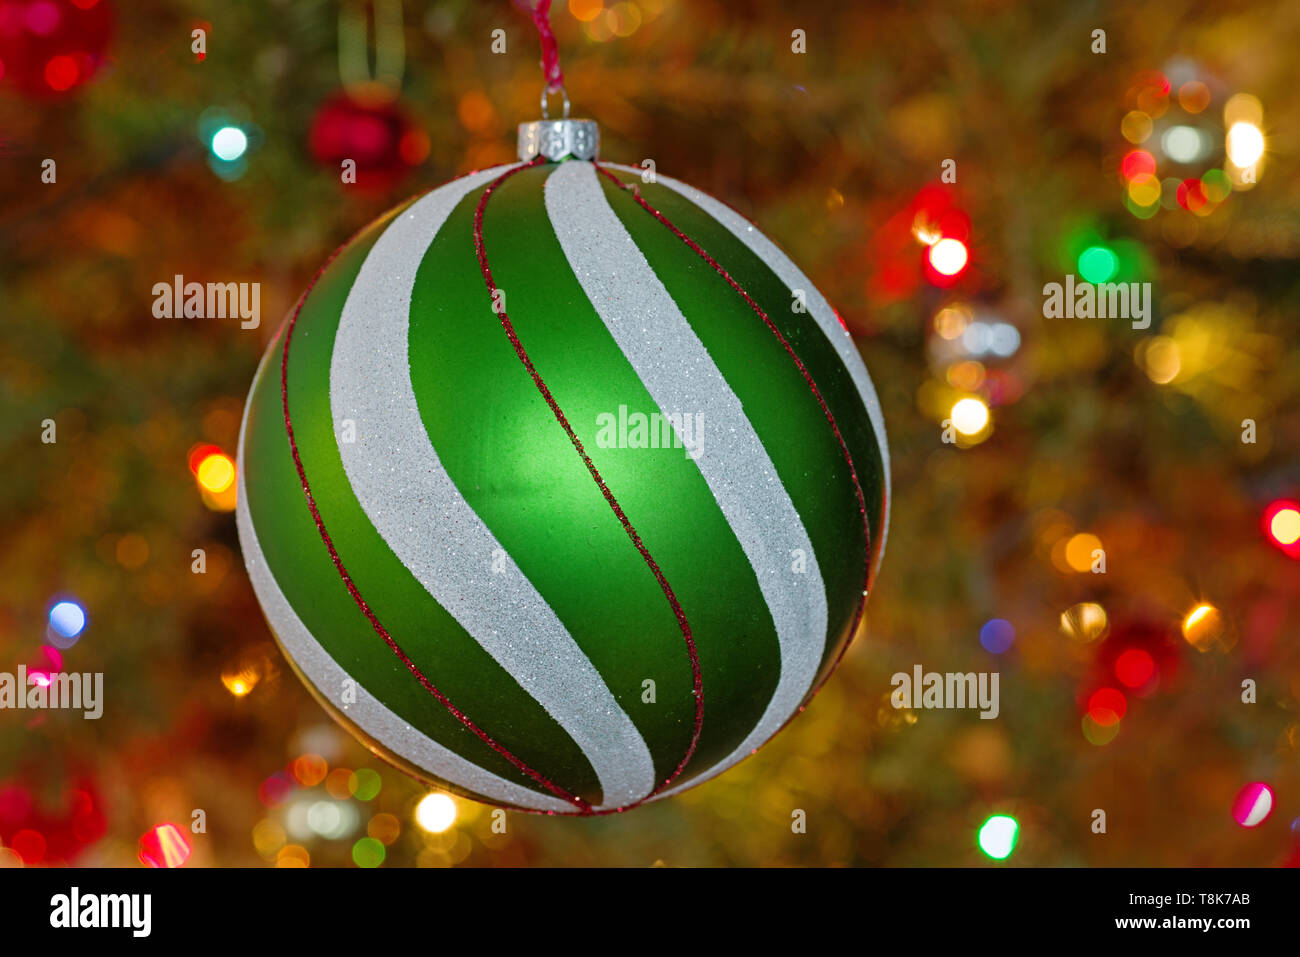 large green and white and red christmas tree ornament with defocussed tree and lights behind it Stock Photo